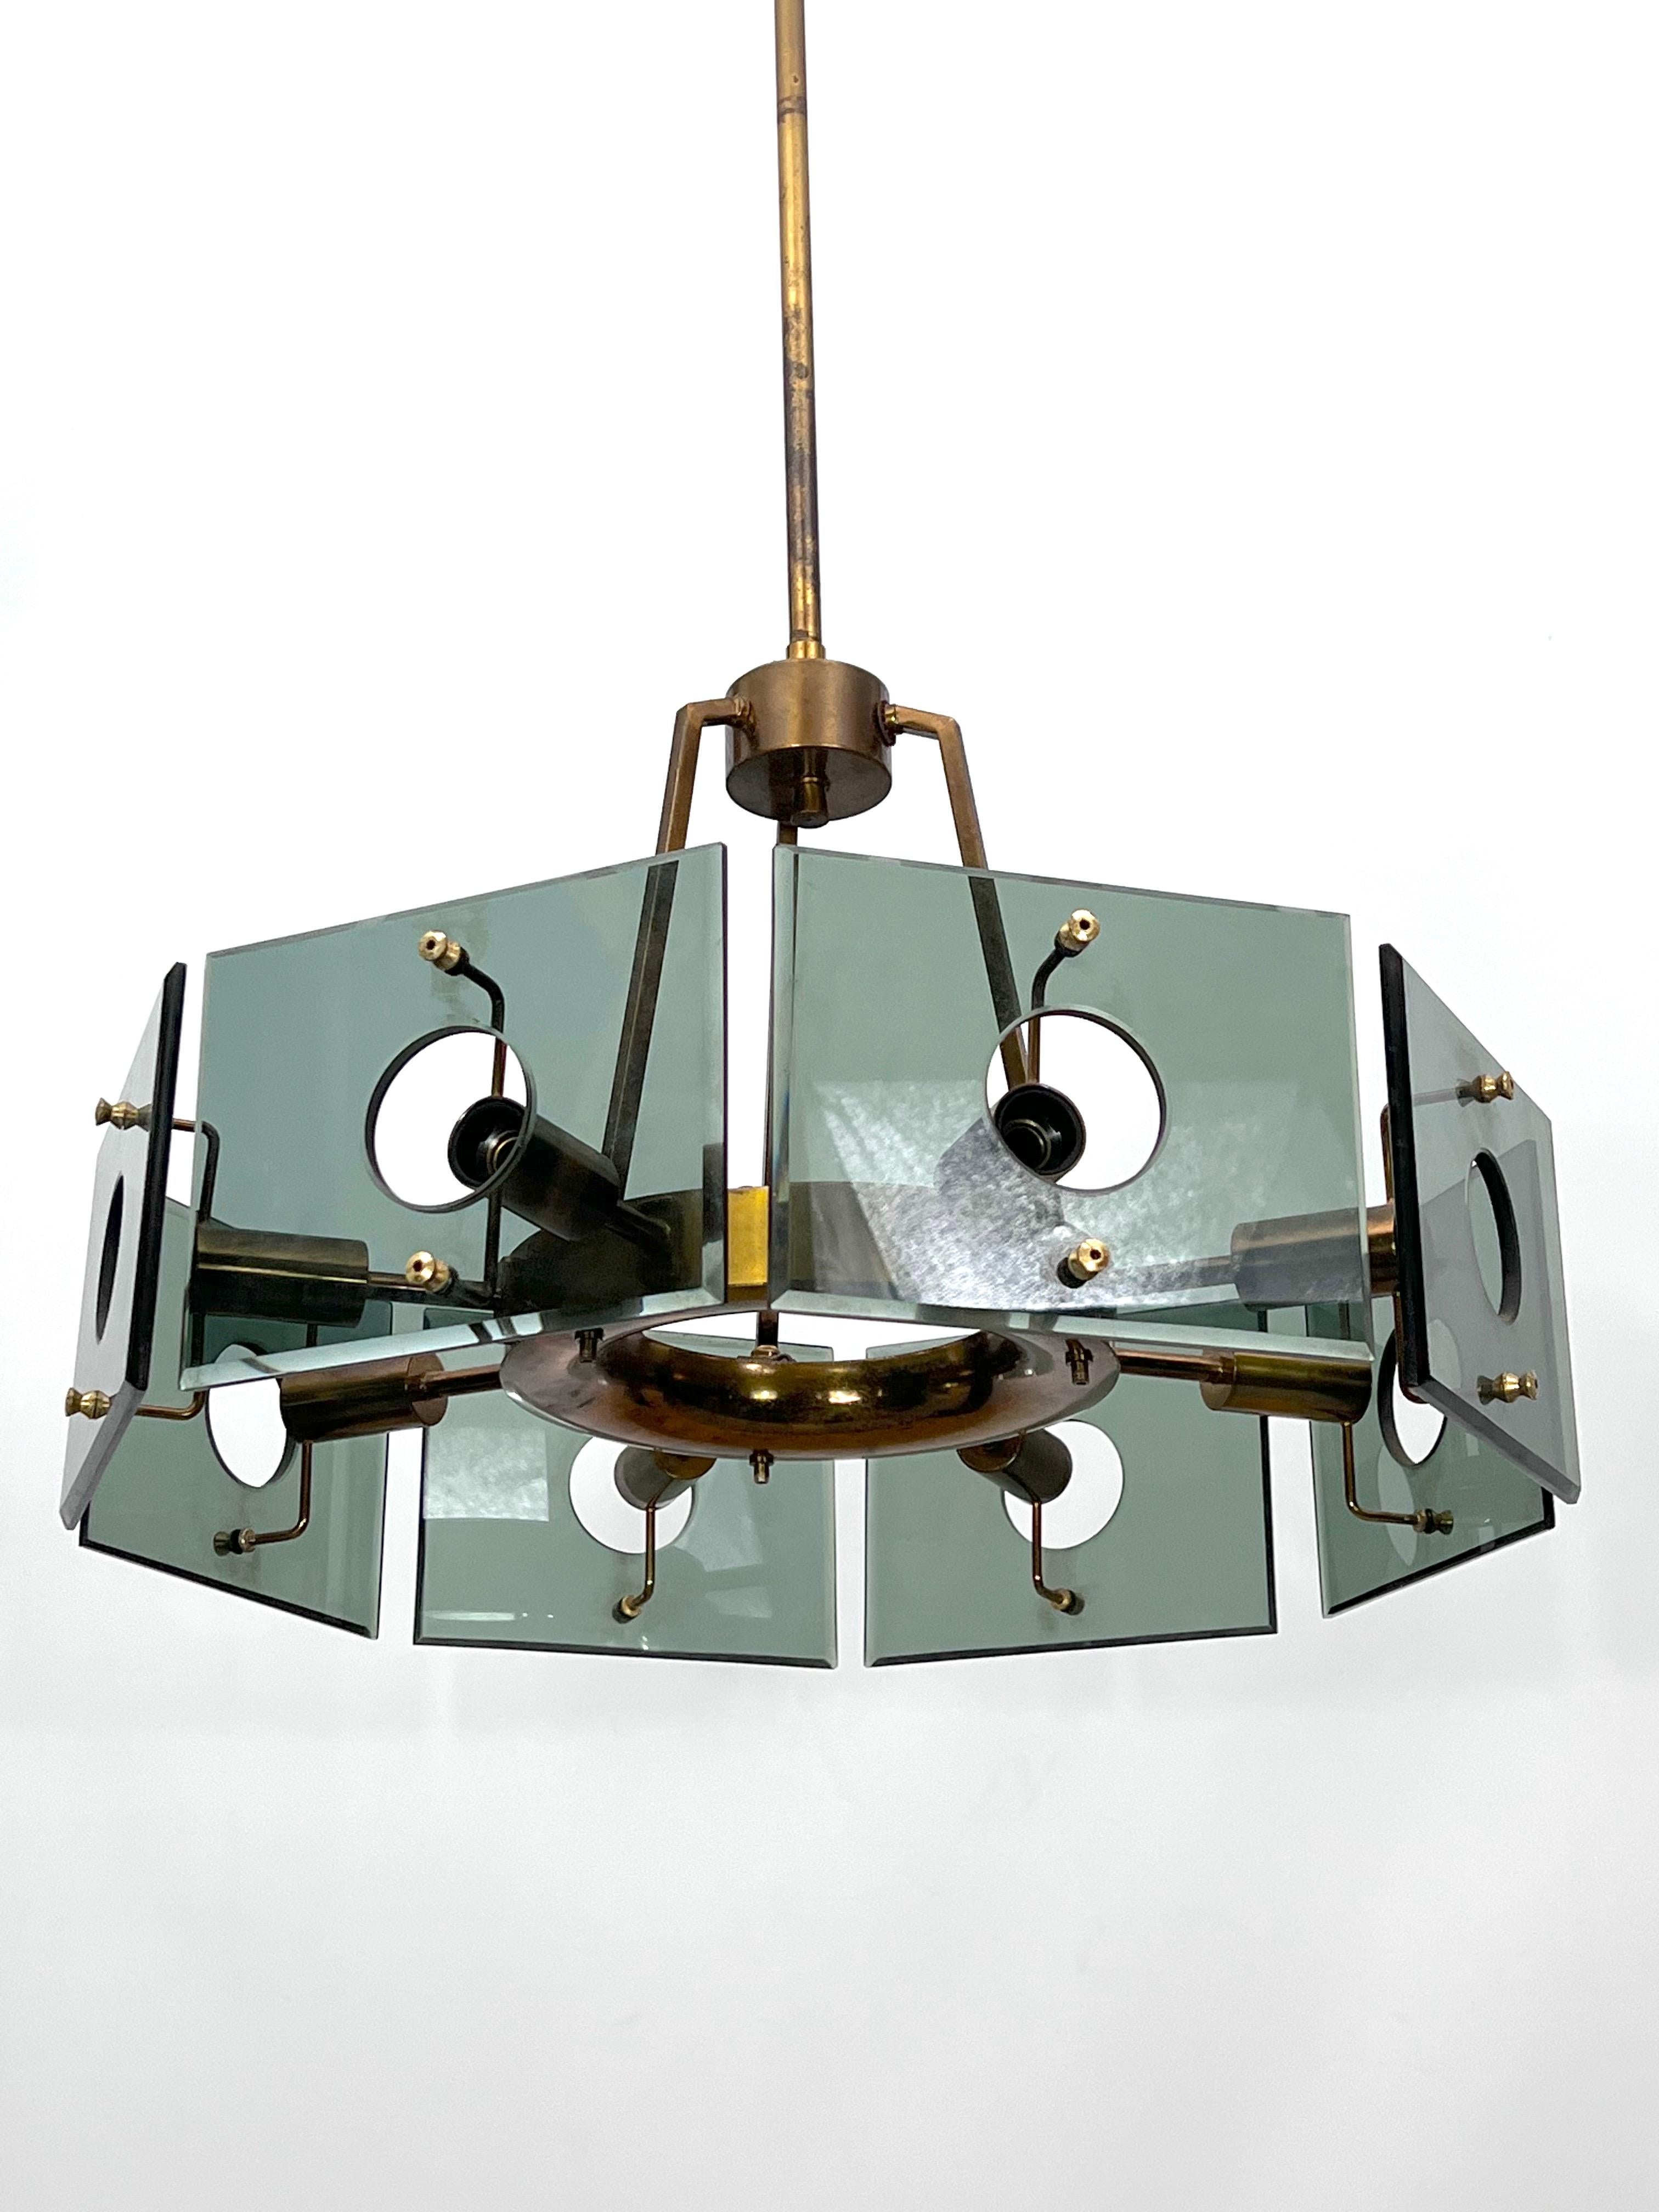 Produced in Italy during the 60s, this round chandelier model 4027 with eight arms was designed by Gino Paroldo for Dino Dei as shown in the original advertisement. It is in very good vintage condition with original patina and normal trace of age